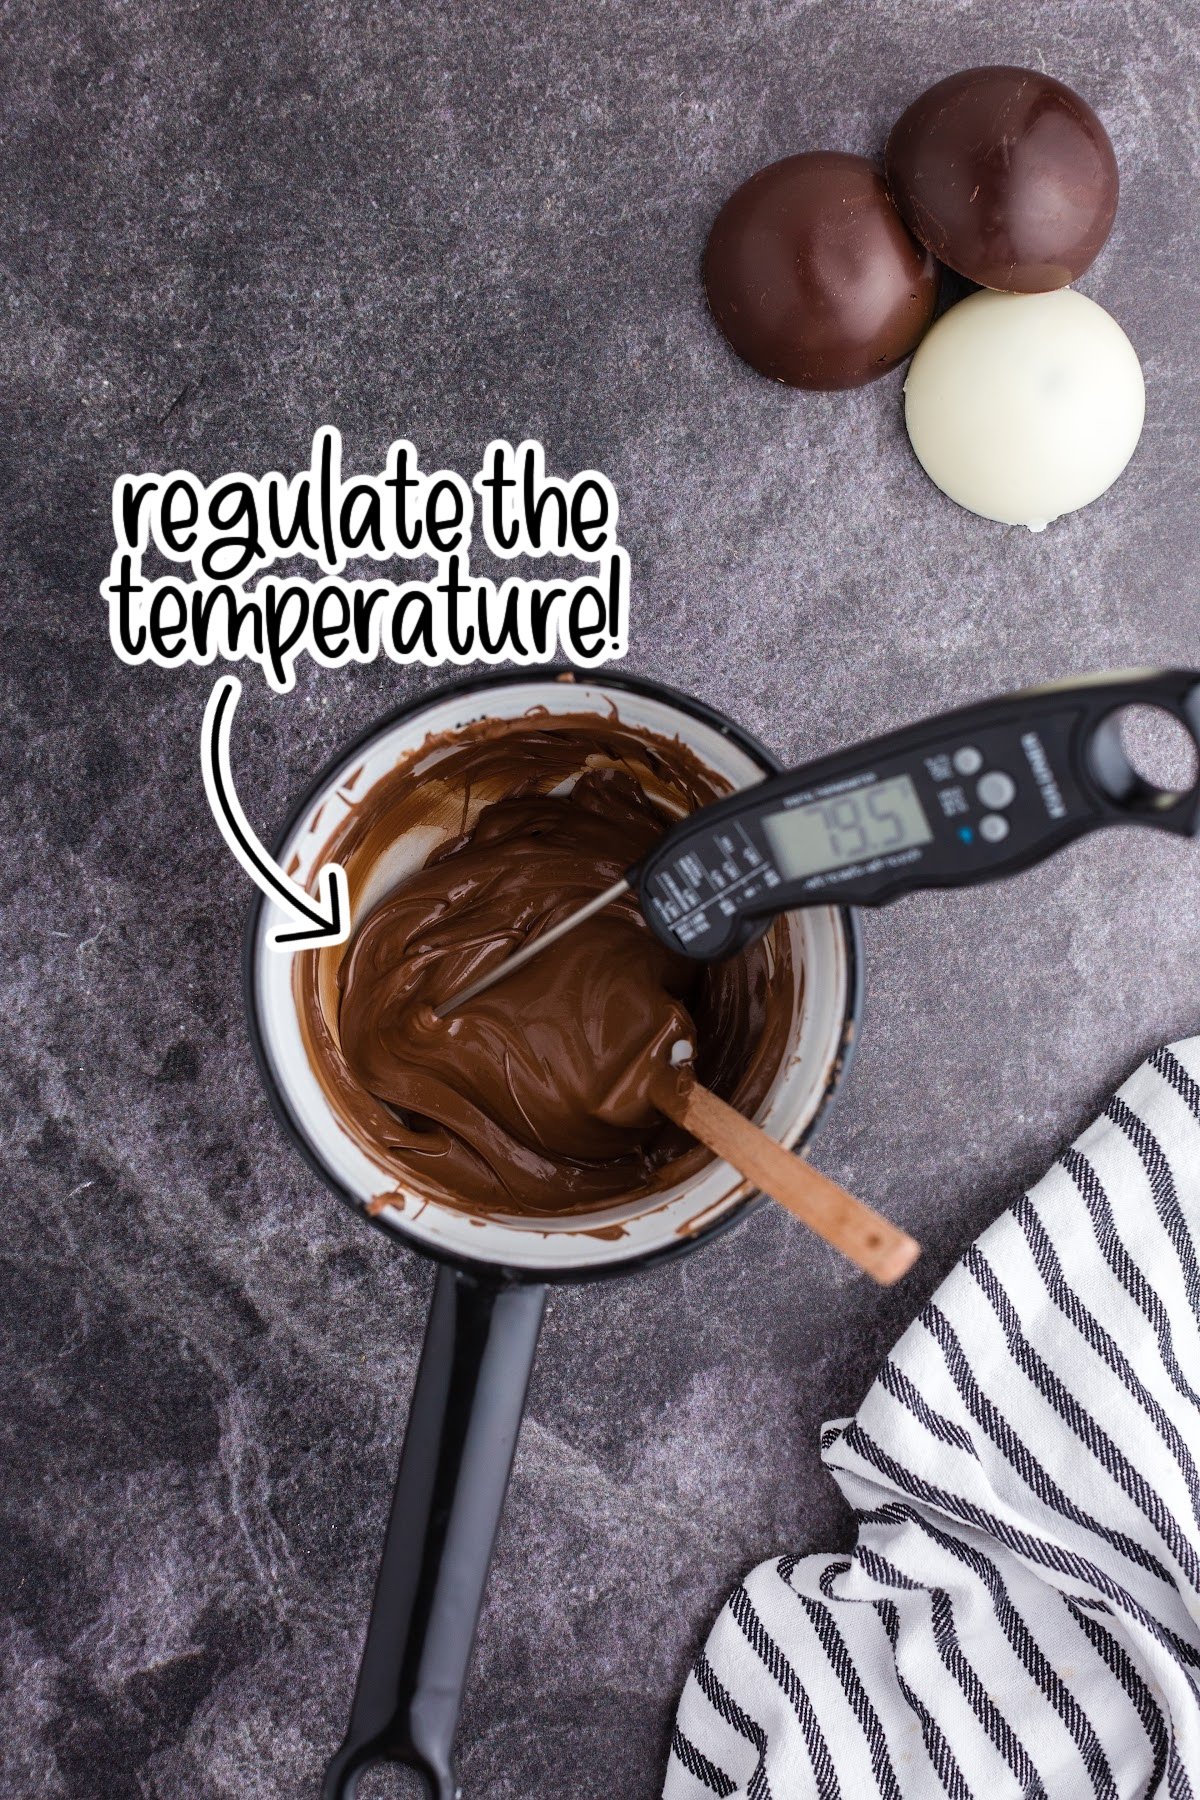 Spatula and digital thermometer in saucepan of melted chocolate; thermometer showing 79°F.